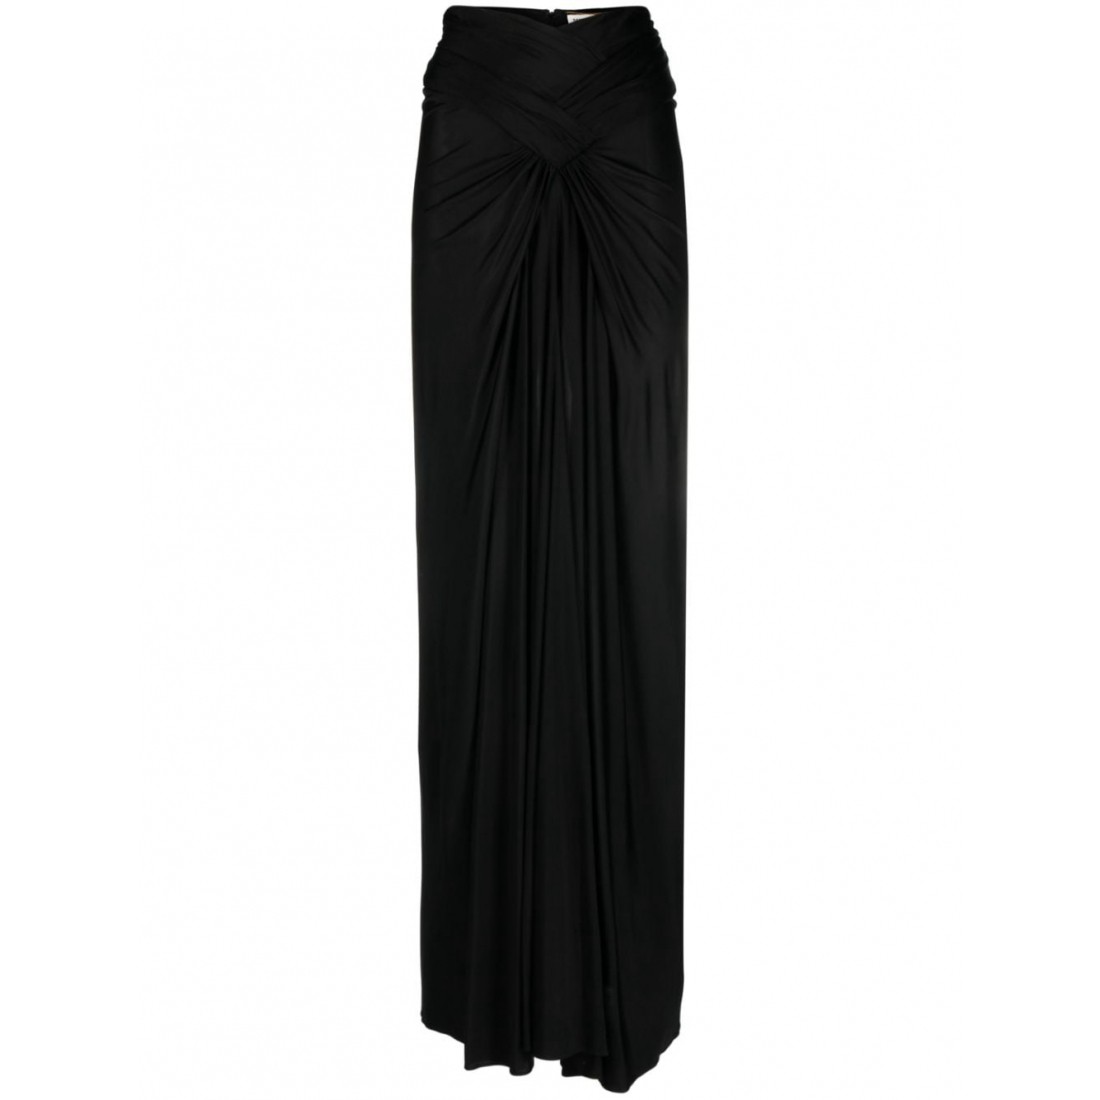 Women's 'Ruched' Maxi Skirt